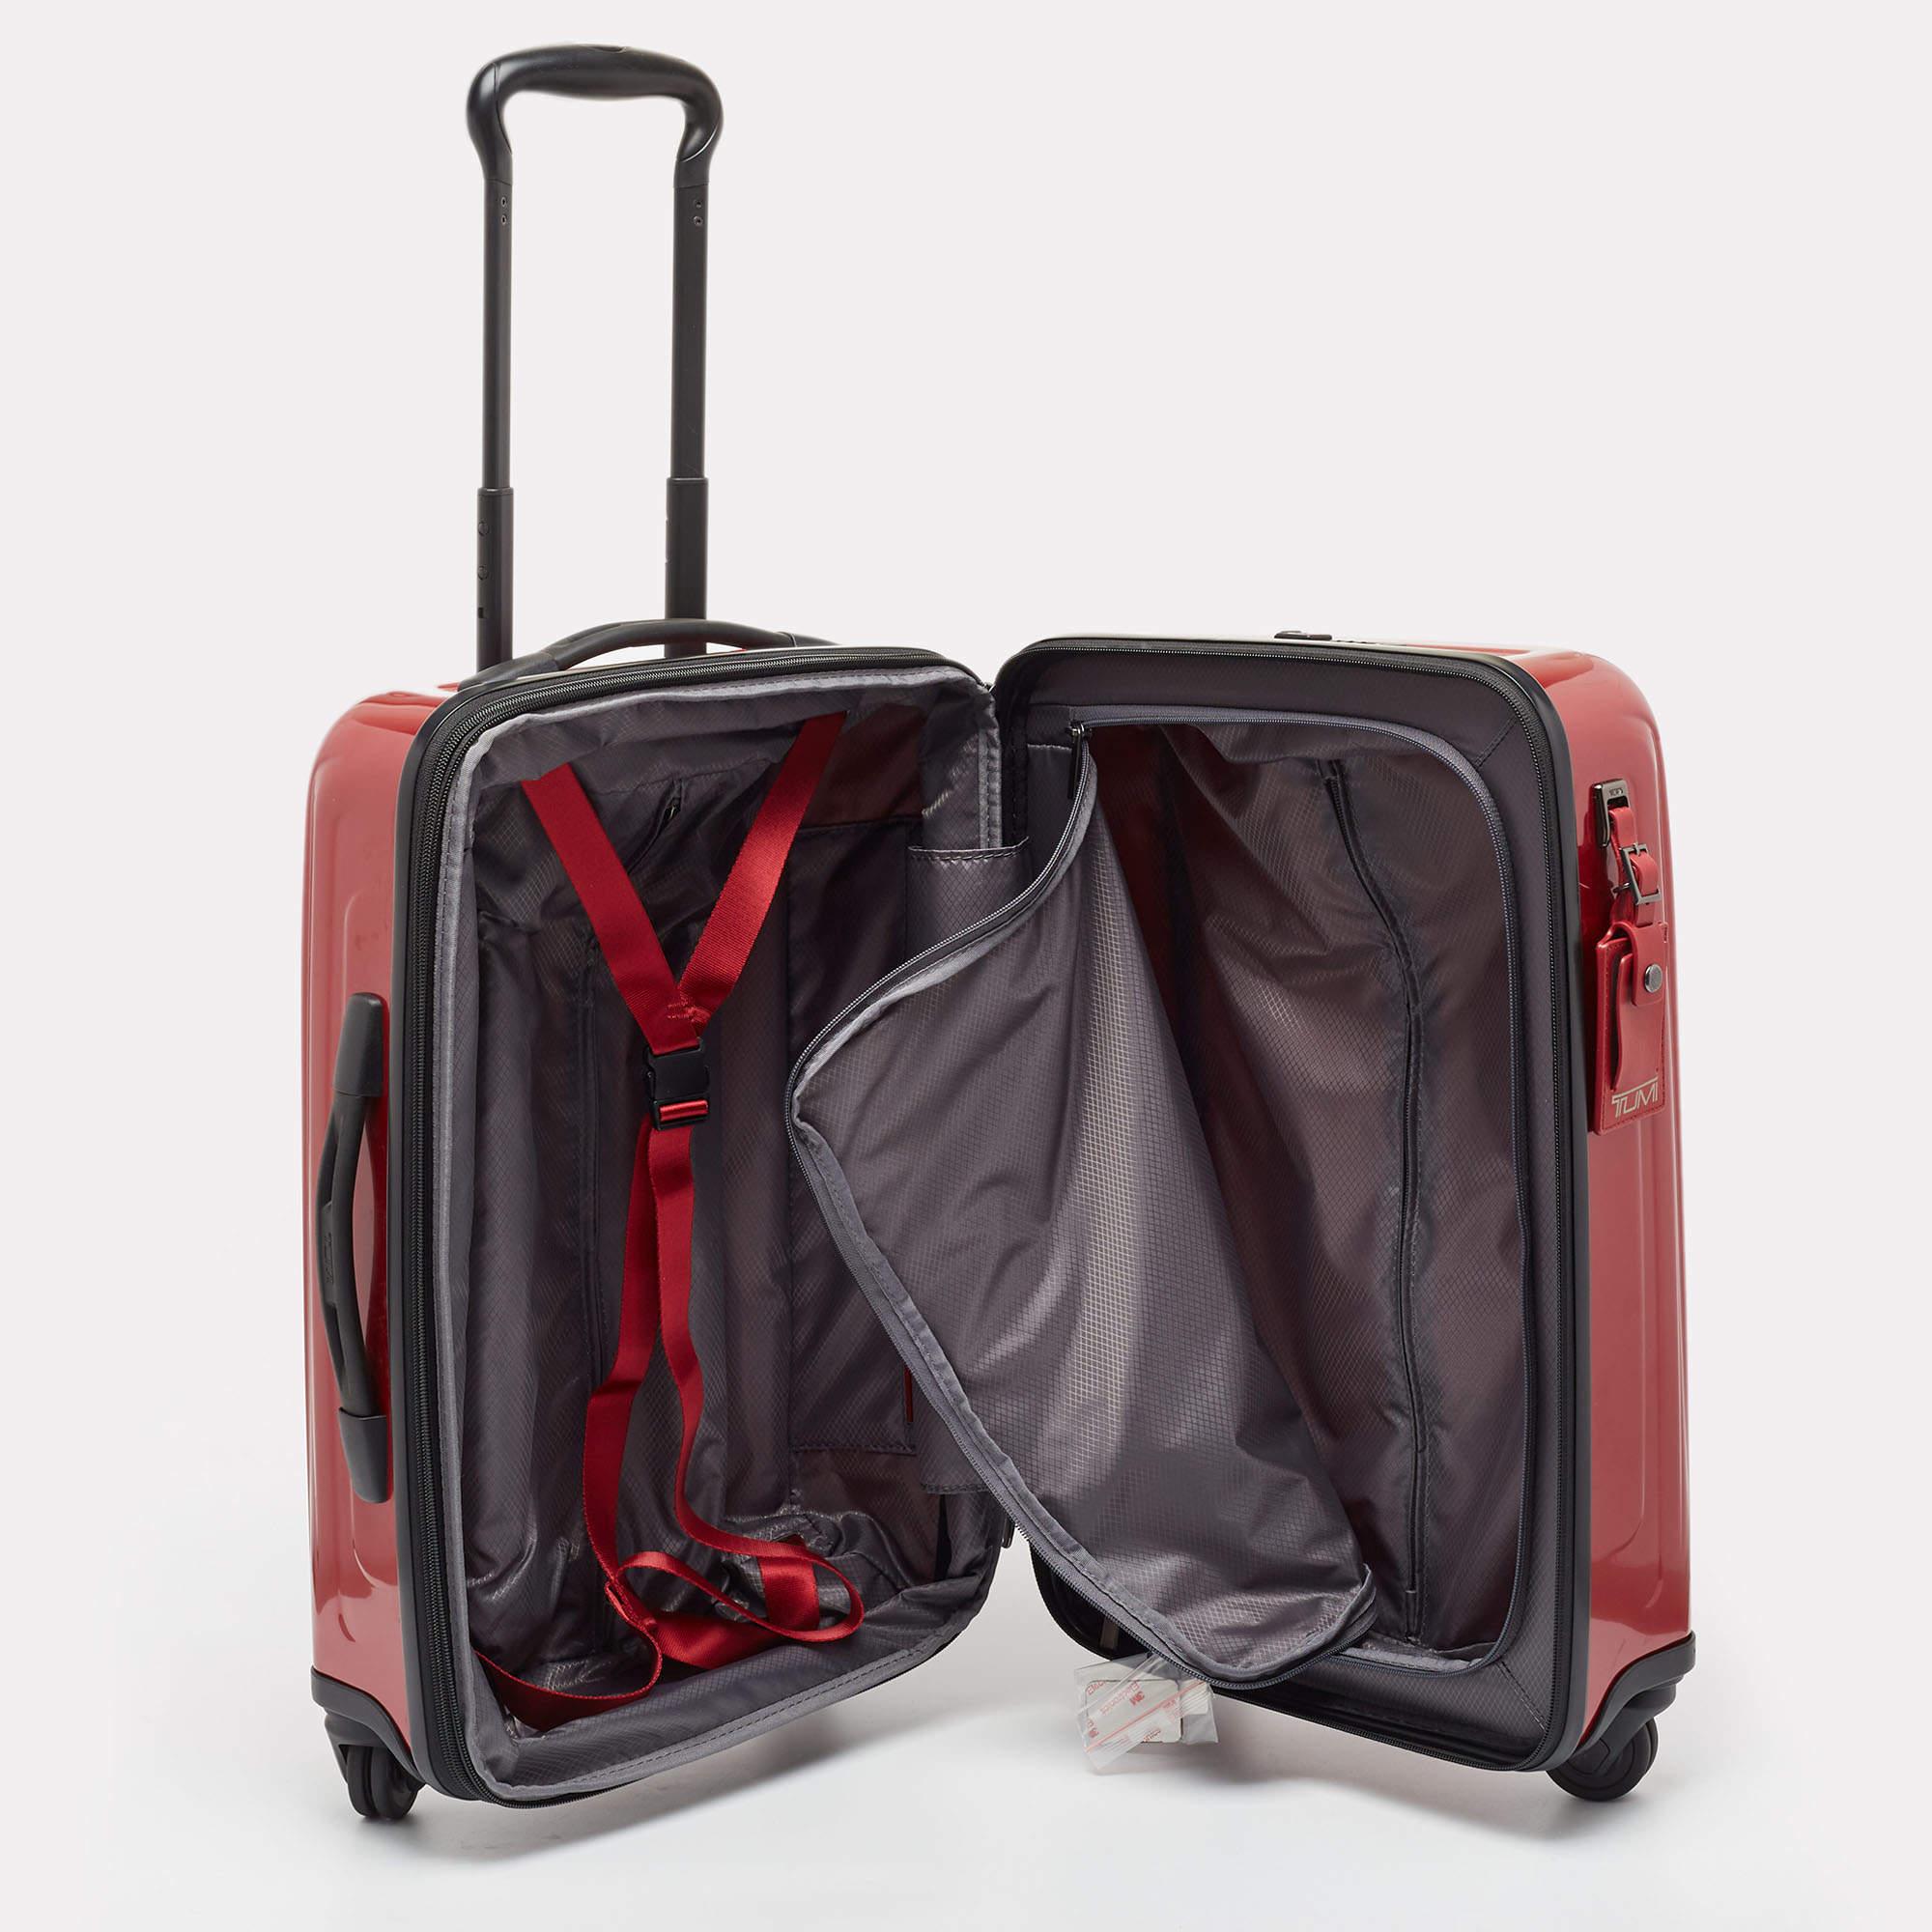 TUMI Red 4 Wheeled V4 International Expandable Carry On Luggage (Bagages à main extensibles à 4 roues) en vente 1